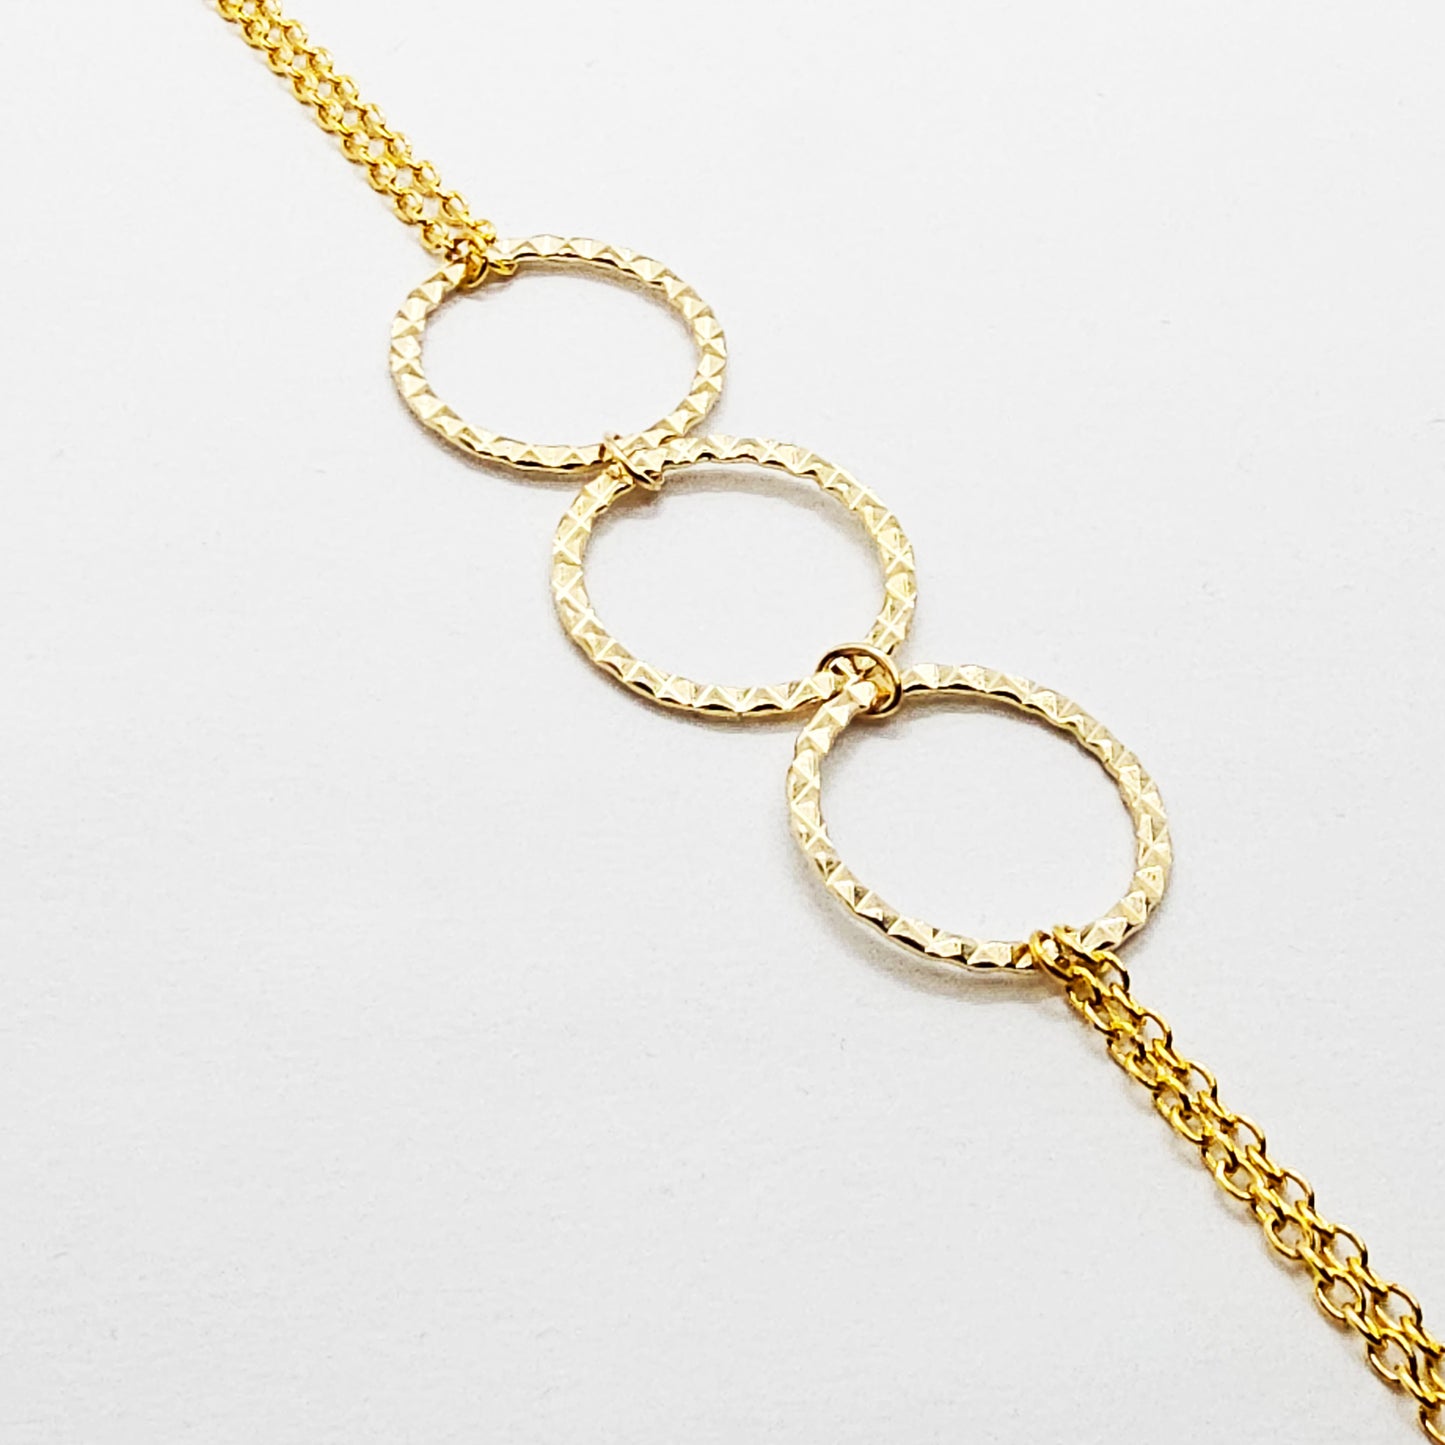 Gold Tri circle necklace attached to nipple nooses or feel the sting with one of our five types of nipple clamps.